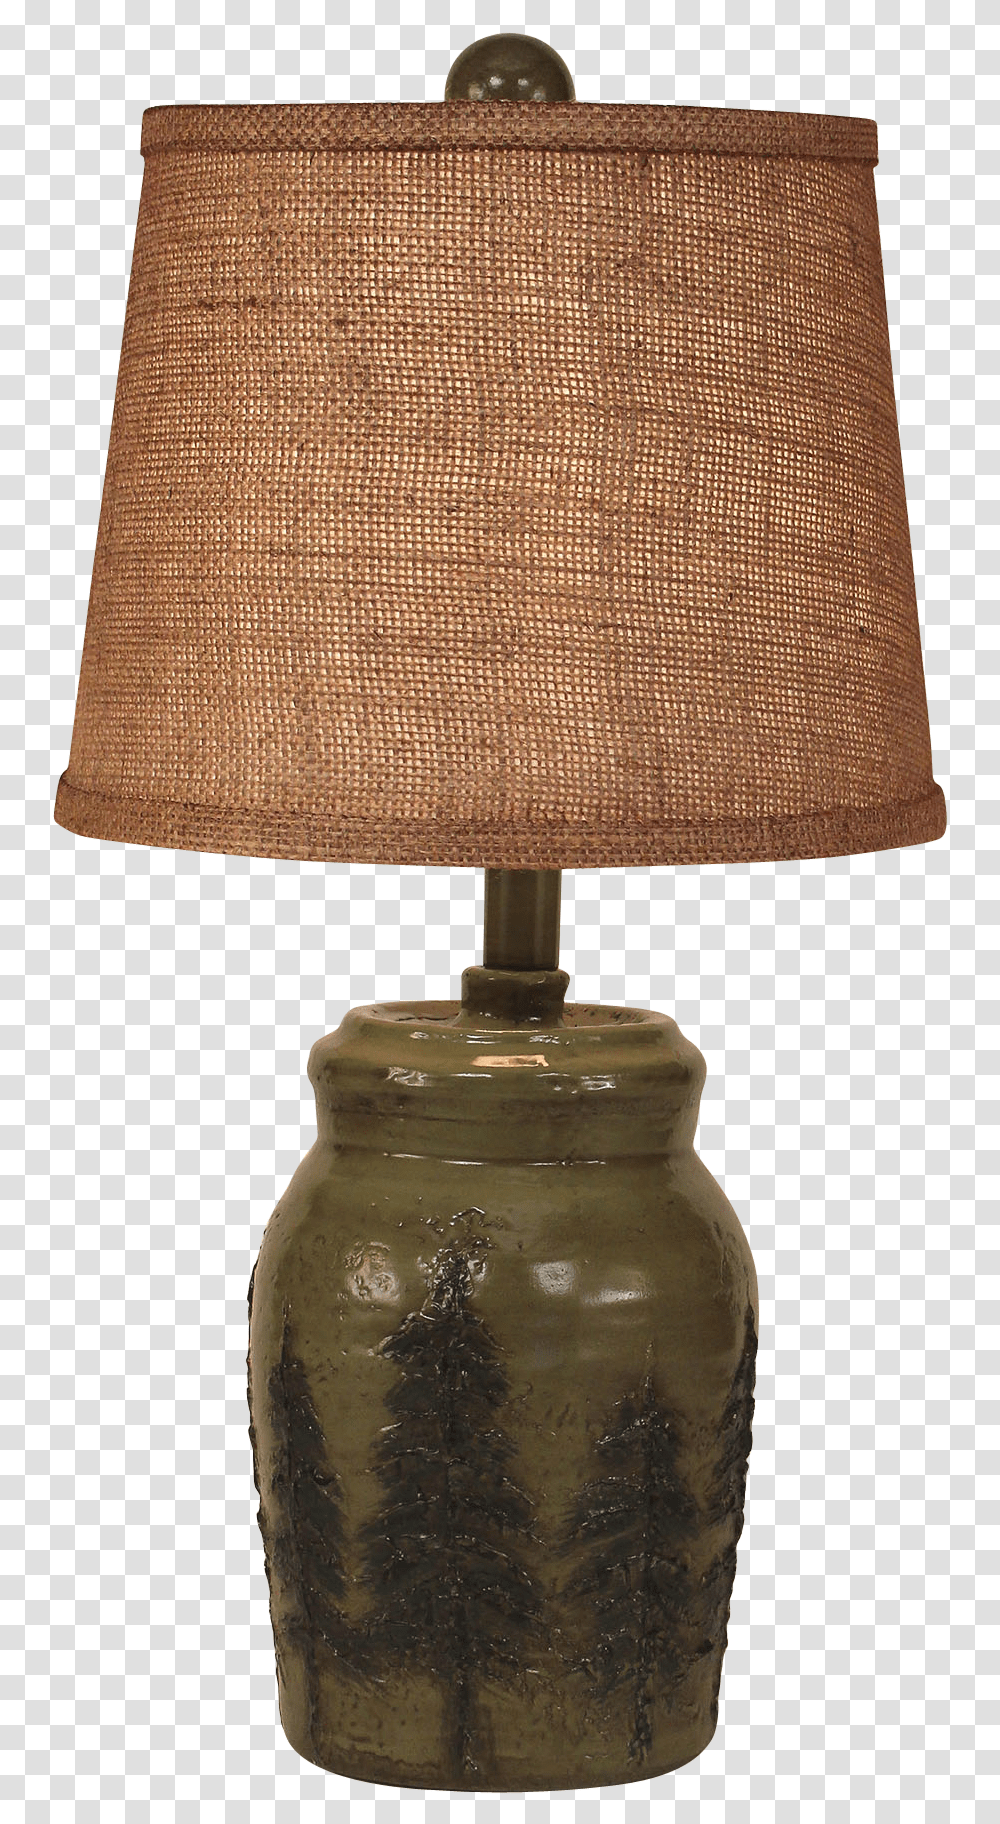 Forest Mini Pine Tree Accent Lamp Lamp, Table Lamp, Lampshade Transparent Png